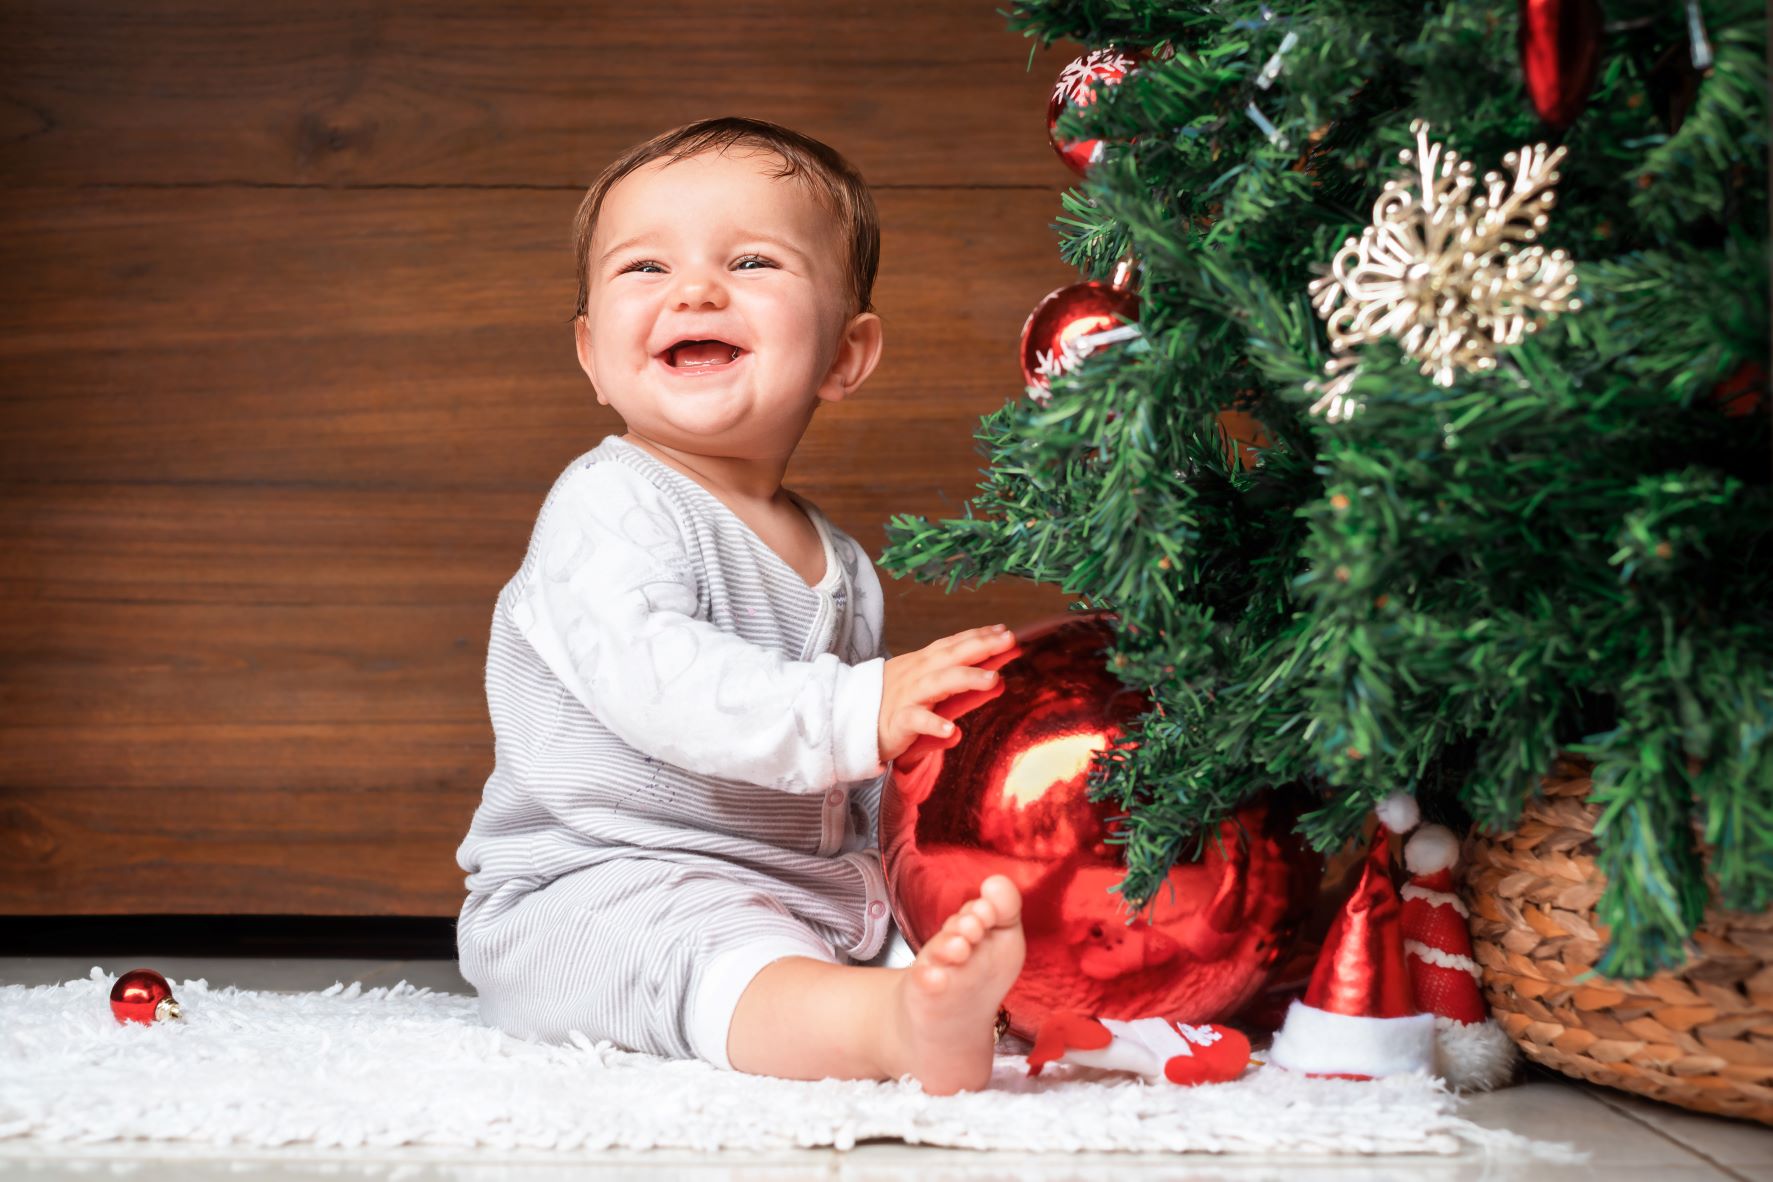 Baby at the Christmas tree